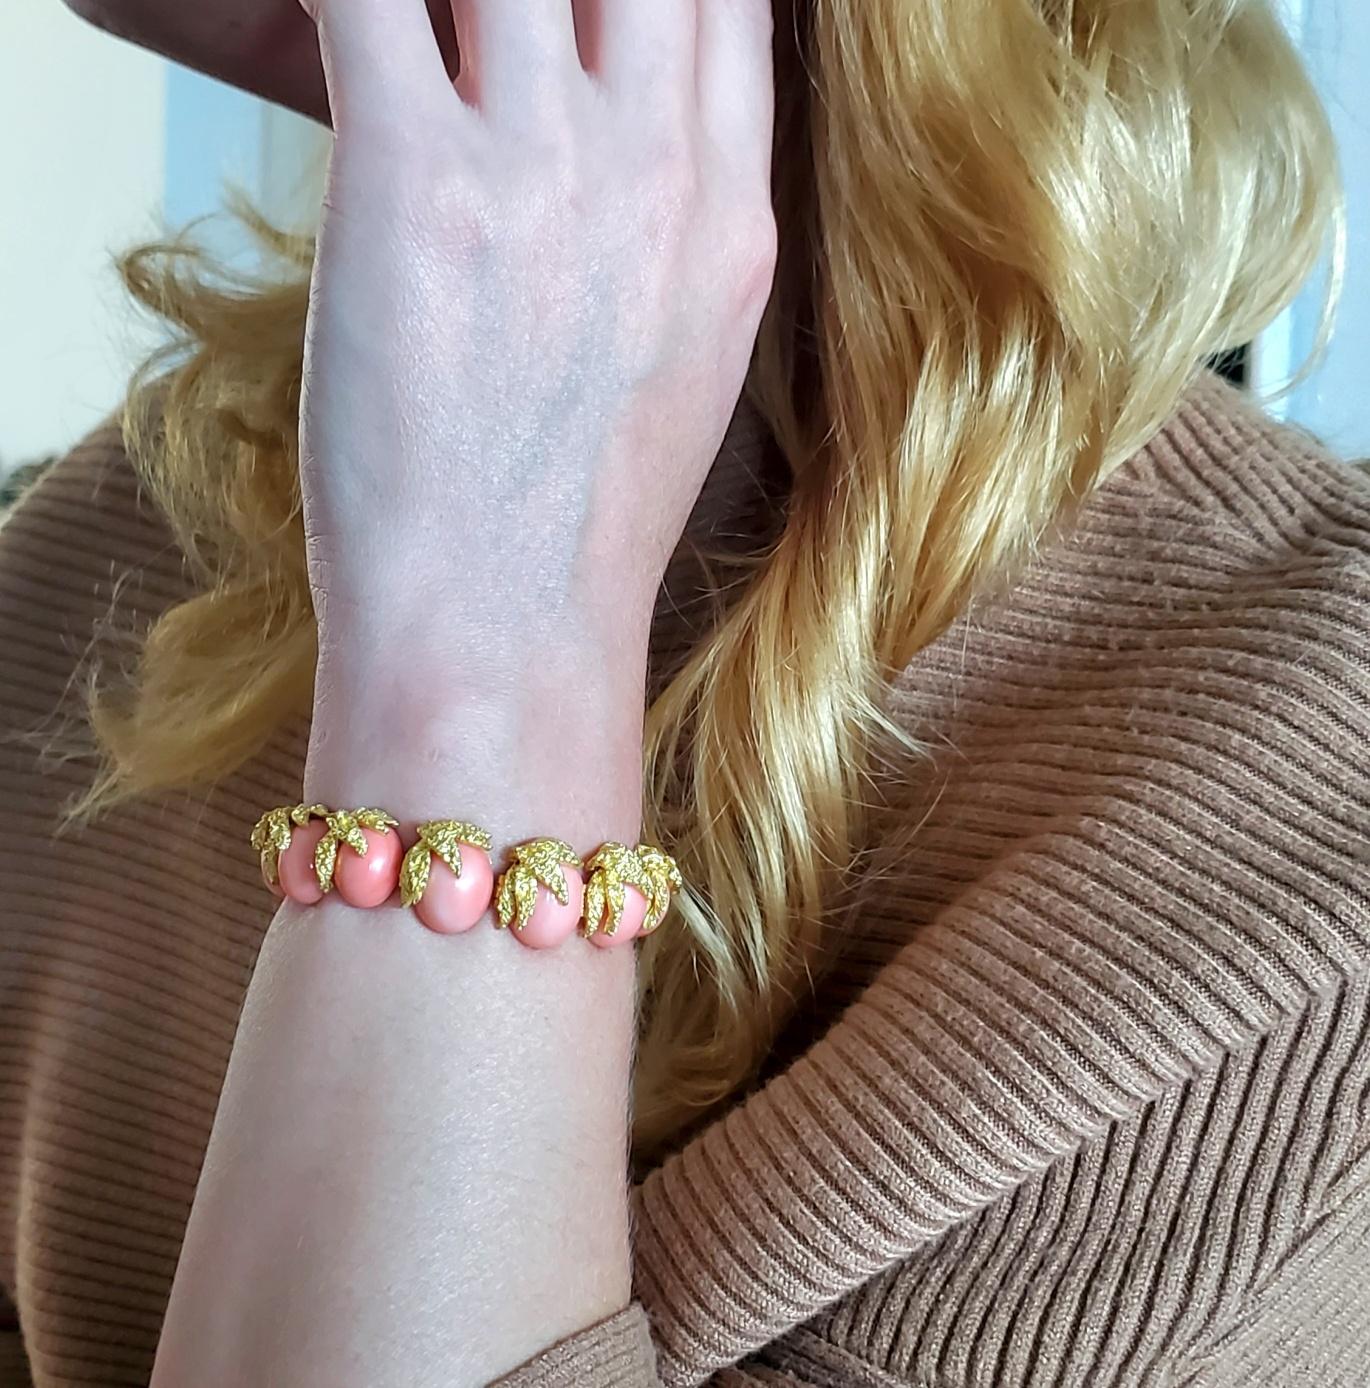 Bracelet with corals designed by Fred of Paris.

Fabulous flexible links bracelet, created in Paris France by the jewelry house of Fred Joaillier, back in the 1970's. This one of a kind piece has been crafted in textured solid yellow gold of 18